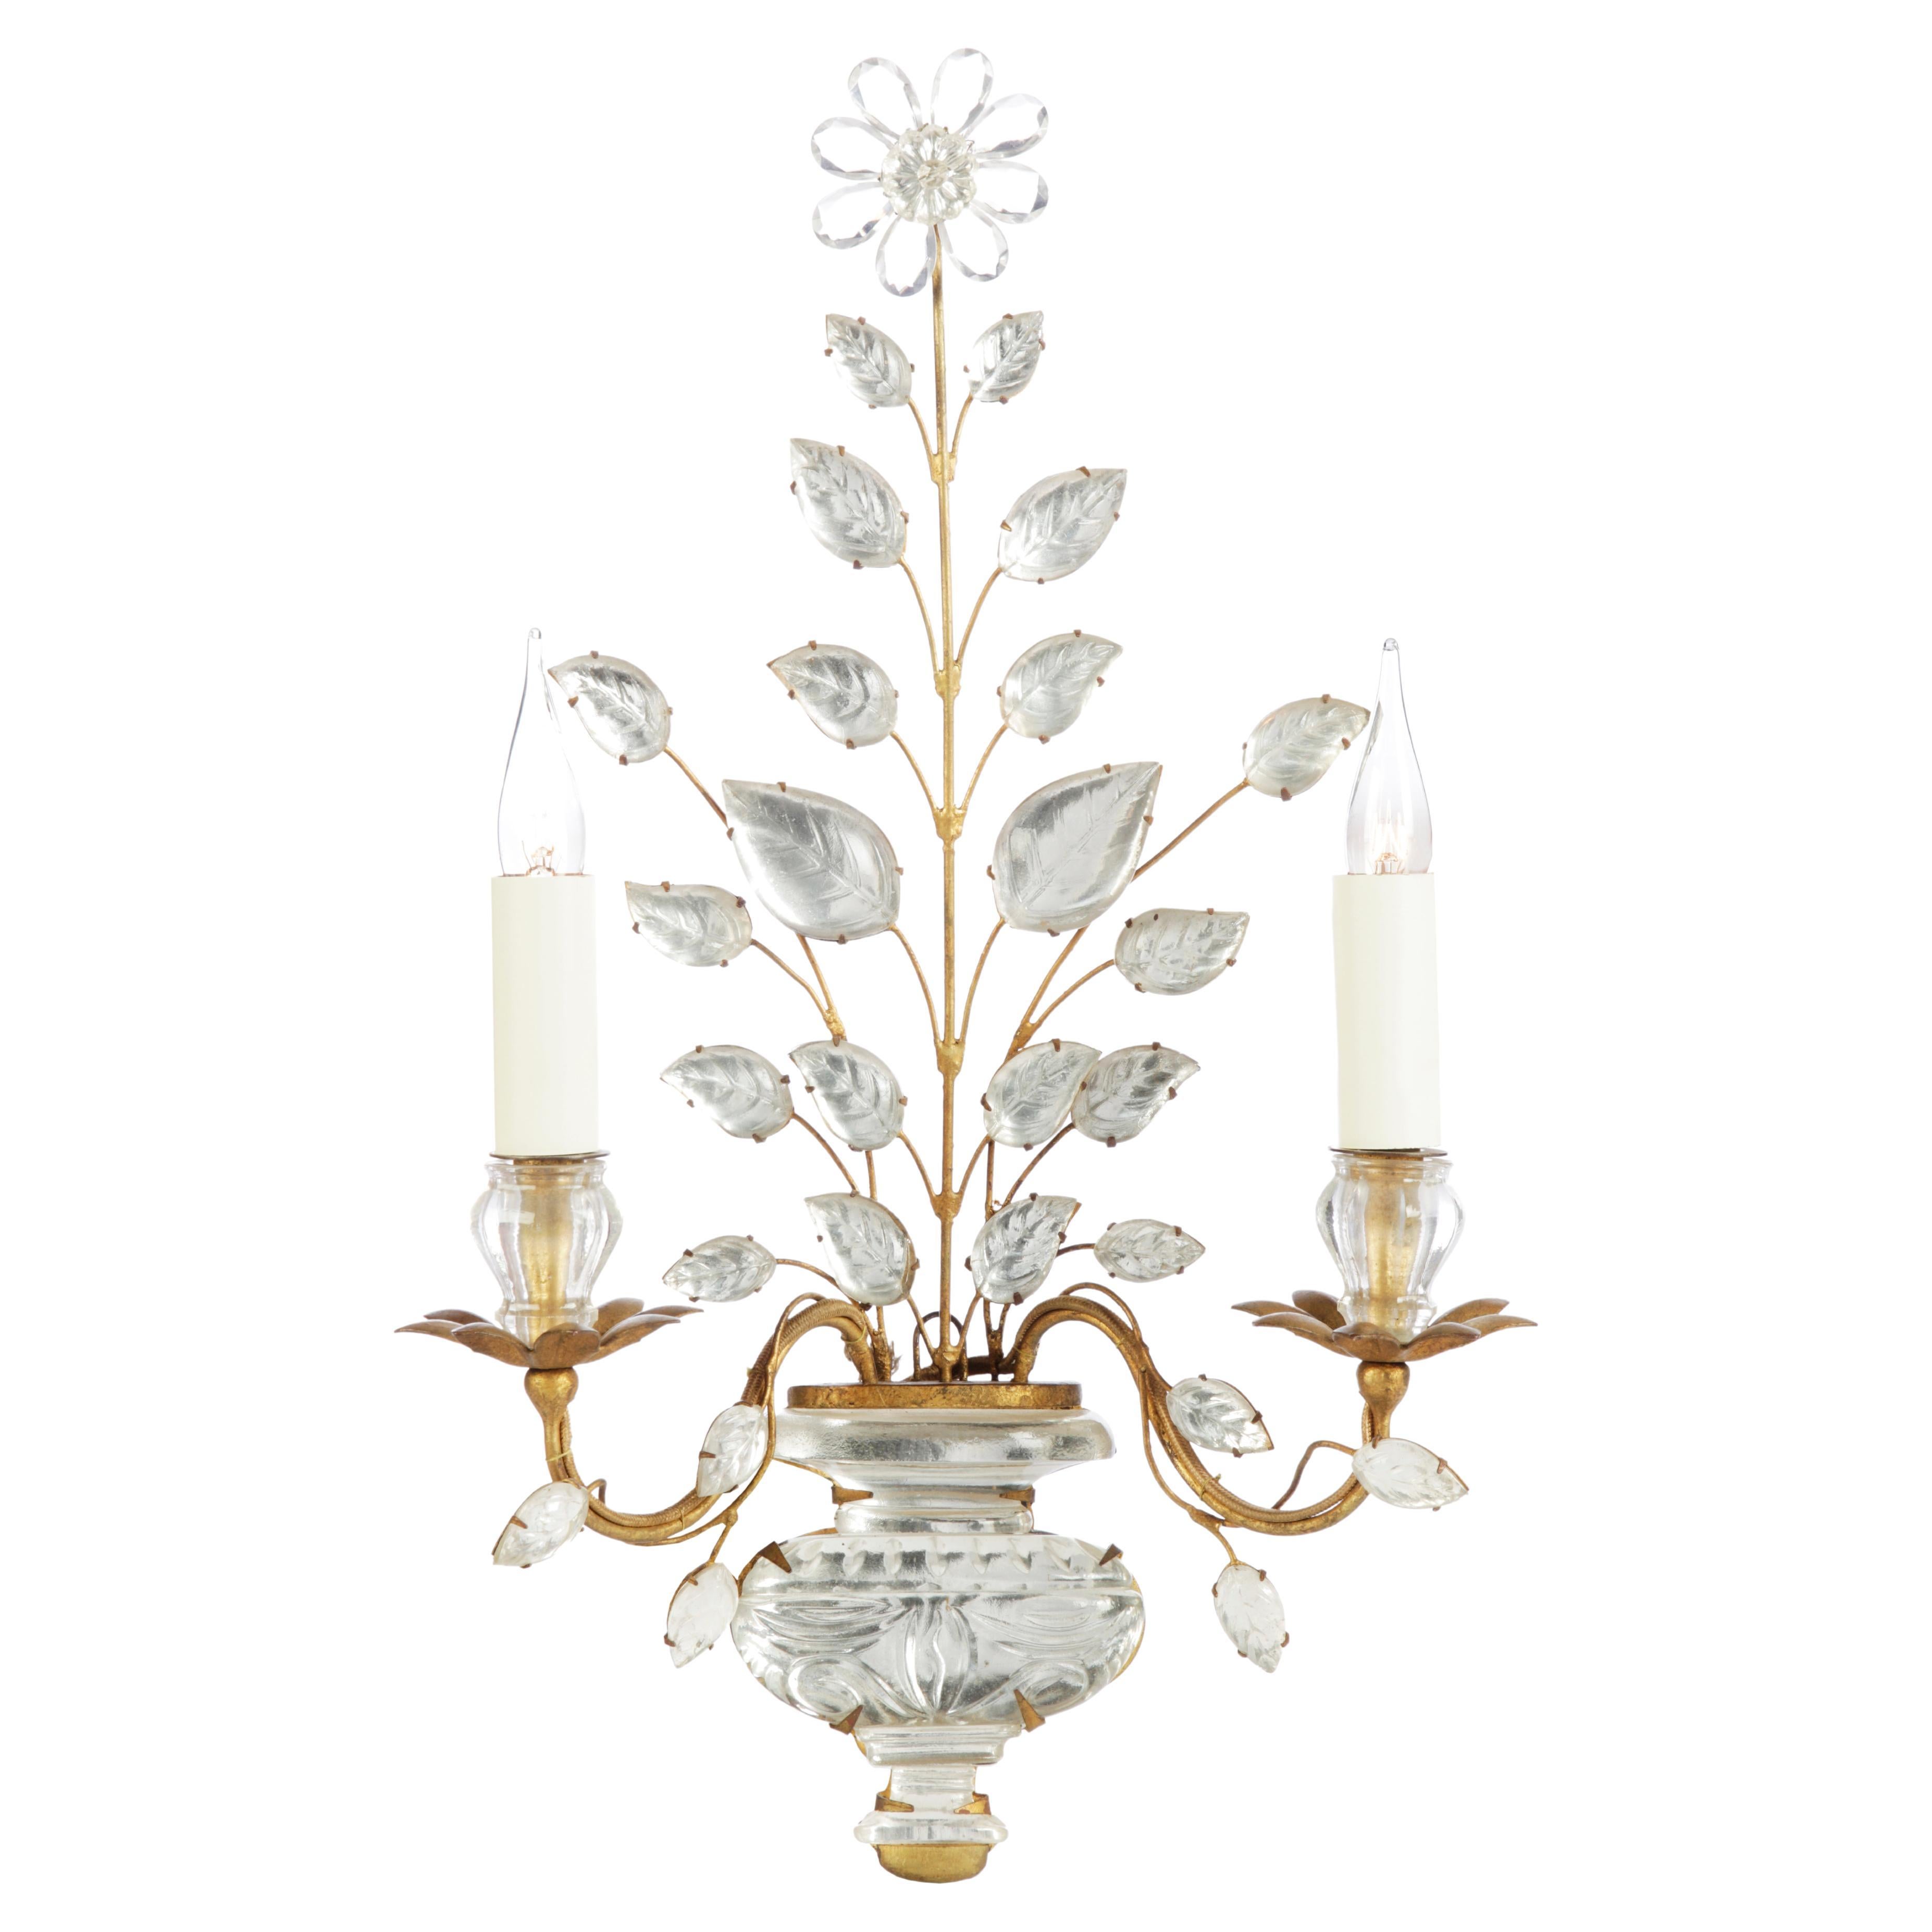 Certified Maison Bagues Sconce, Iron and Crystal 2 Lights #00039 For Sale